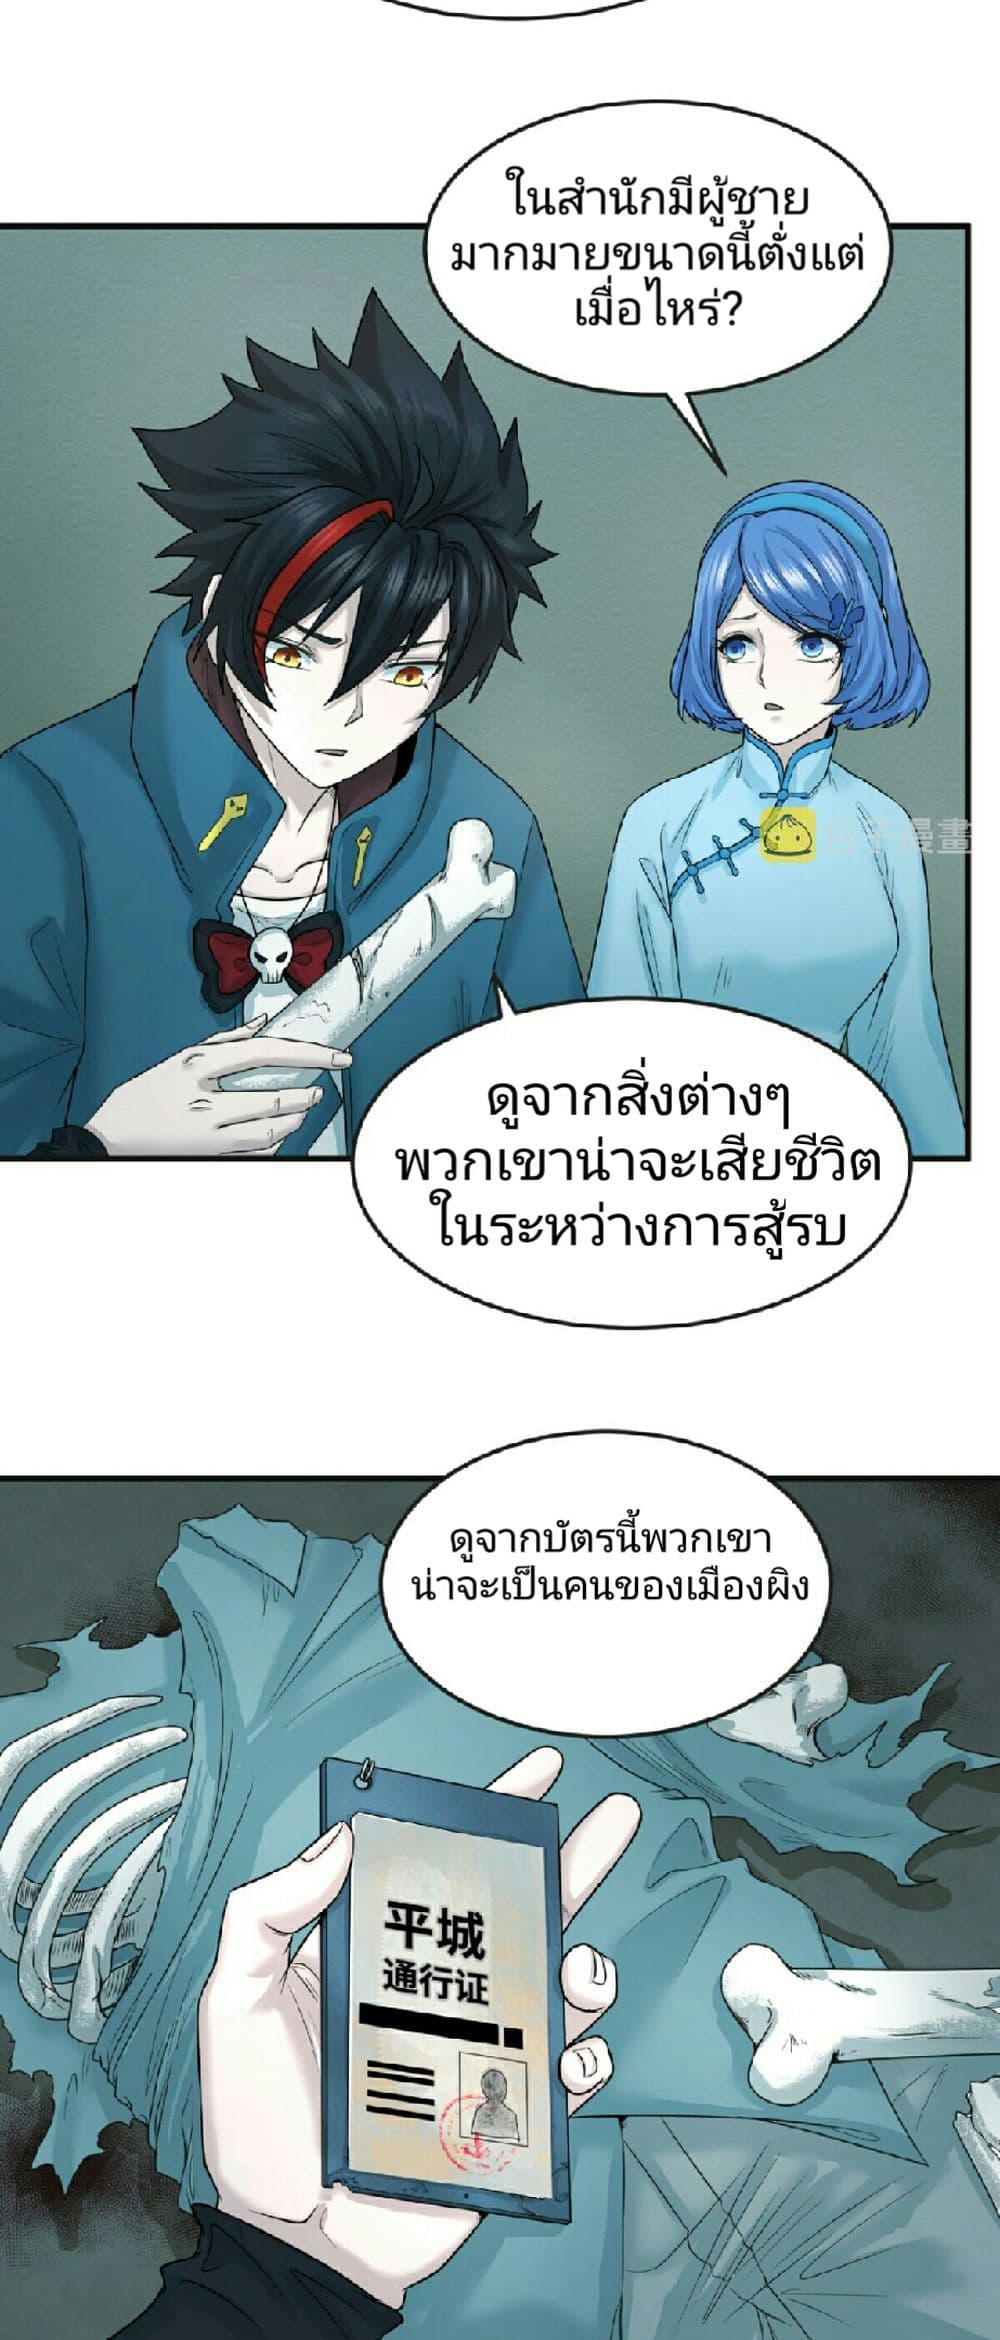 The Age of Ghost Spirits à¸à¸­à¸à¸à¸µà¹ 50 (3)